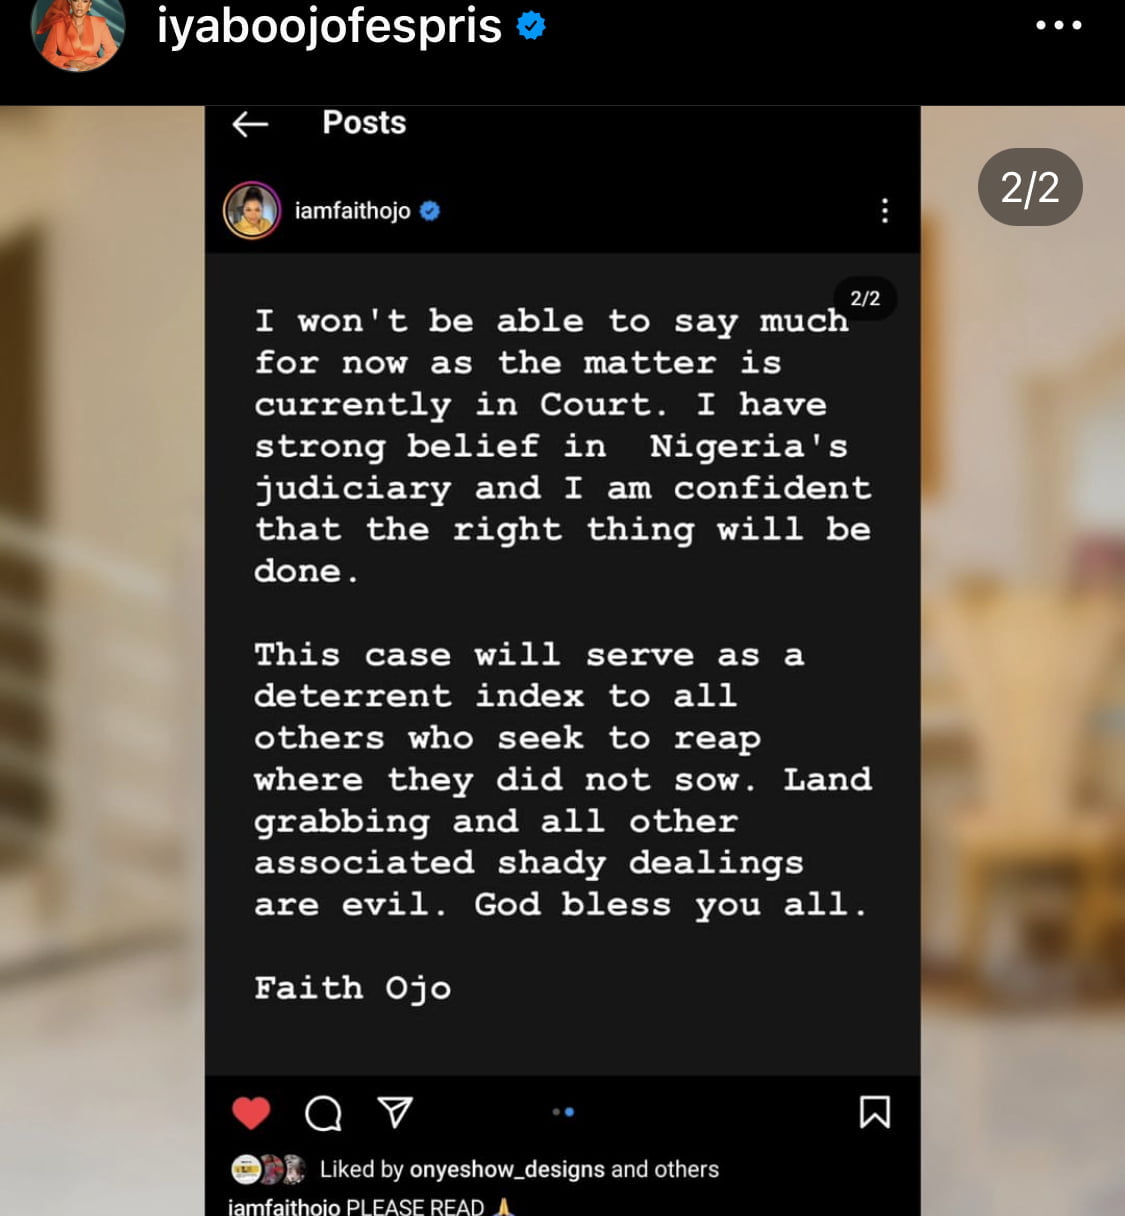 The second slide from Iyabo Ojo's post about Faith Ojo's statement.